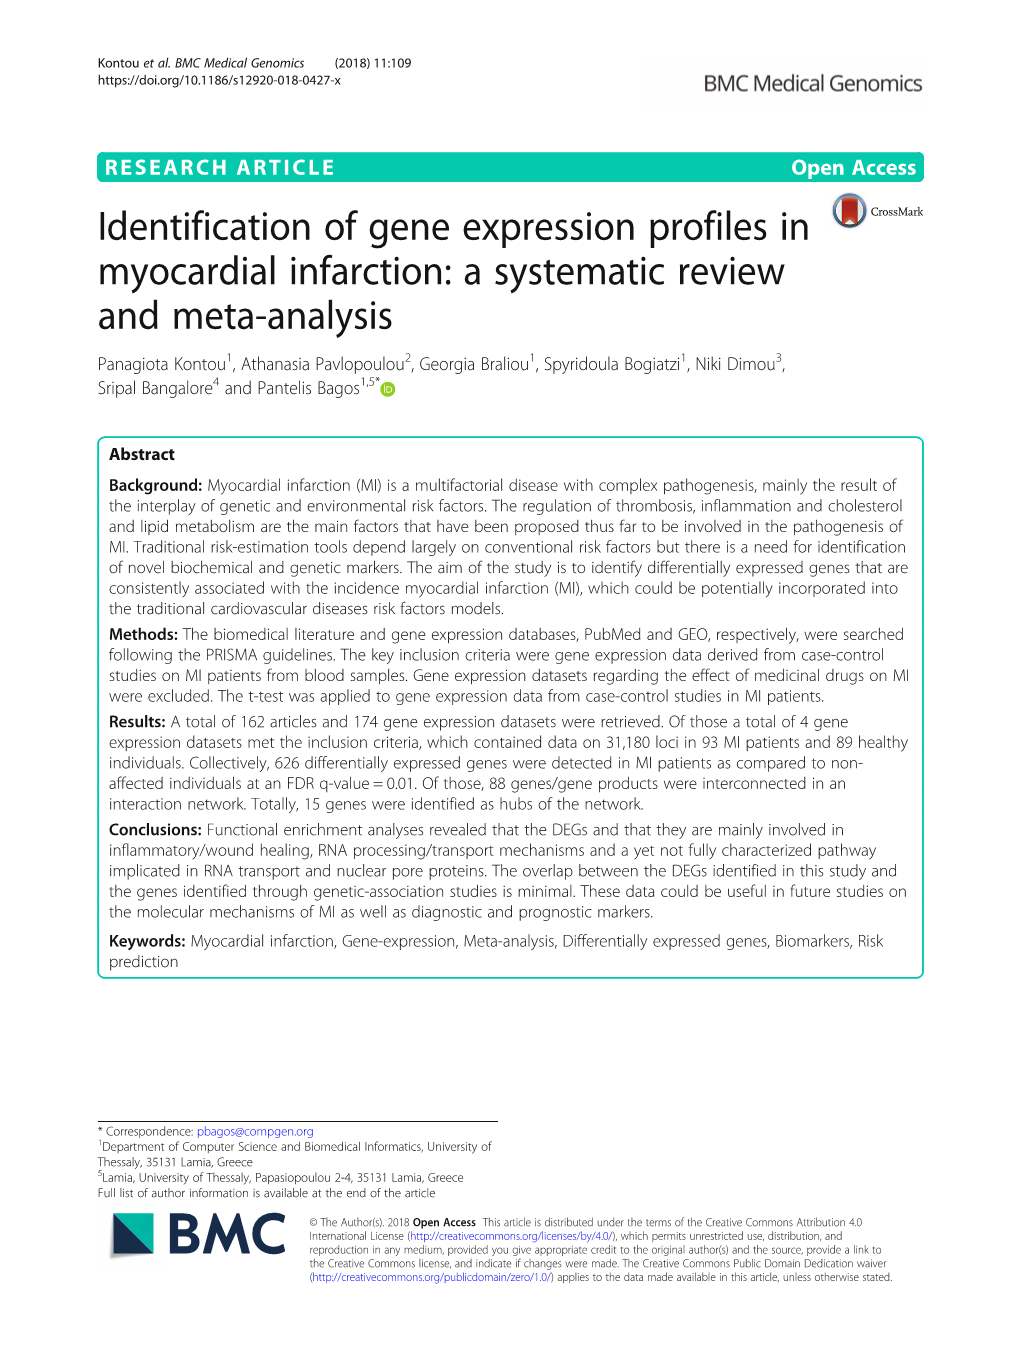 Identification of Gene Expression Profiles In